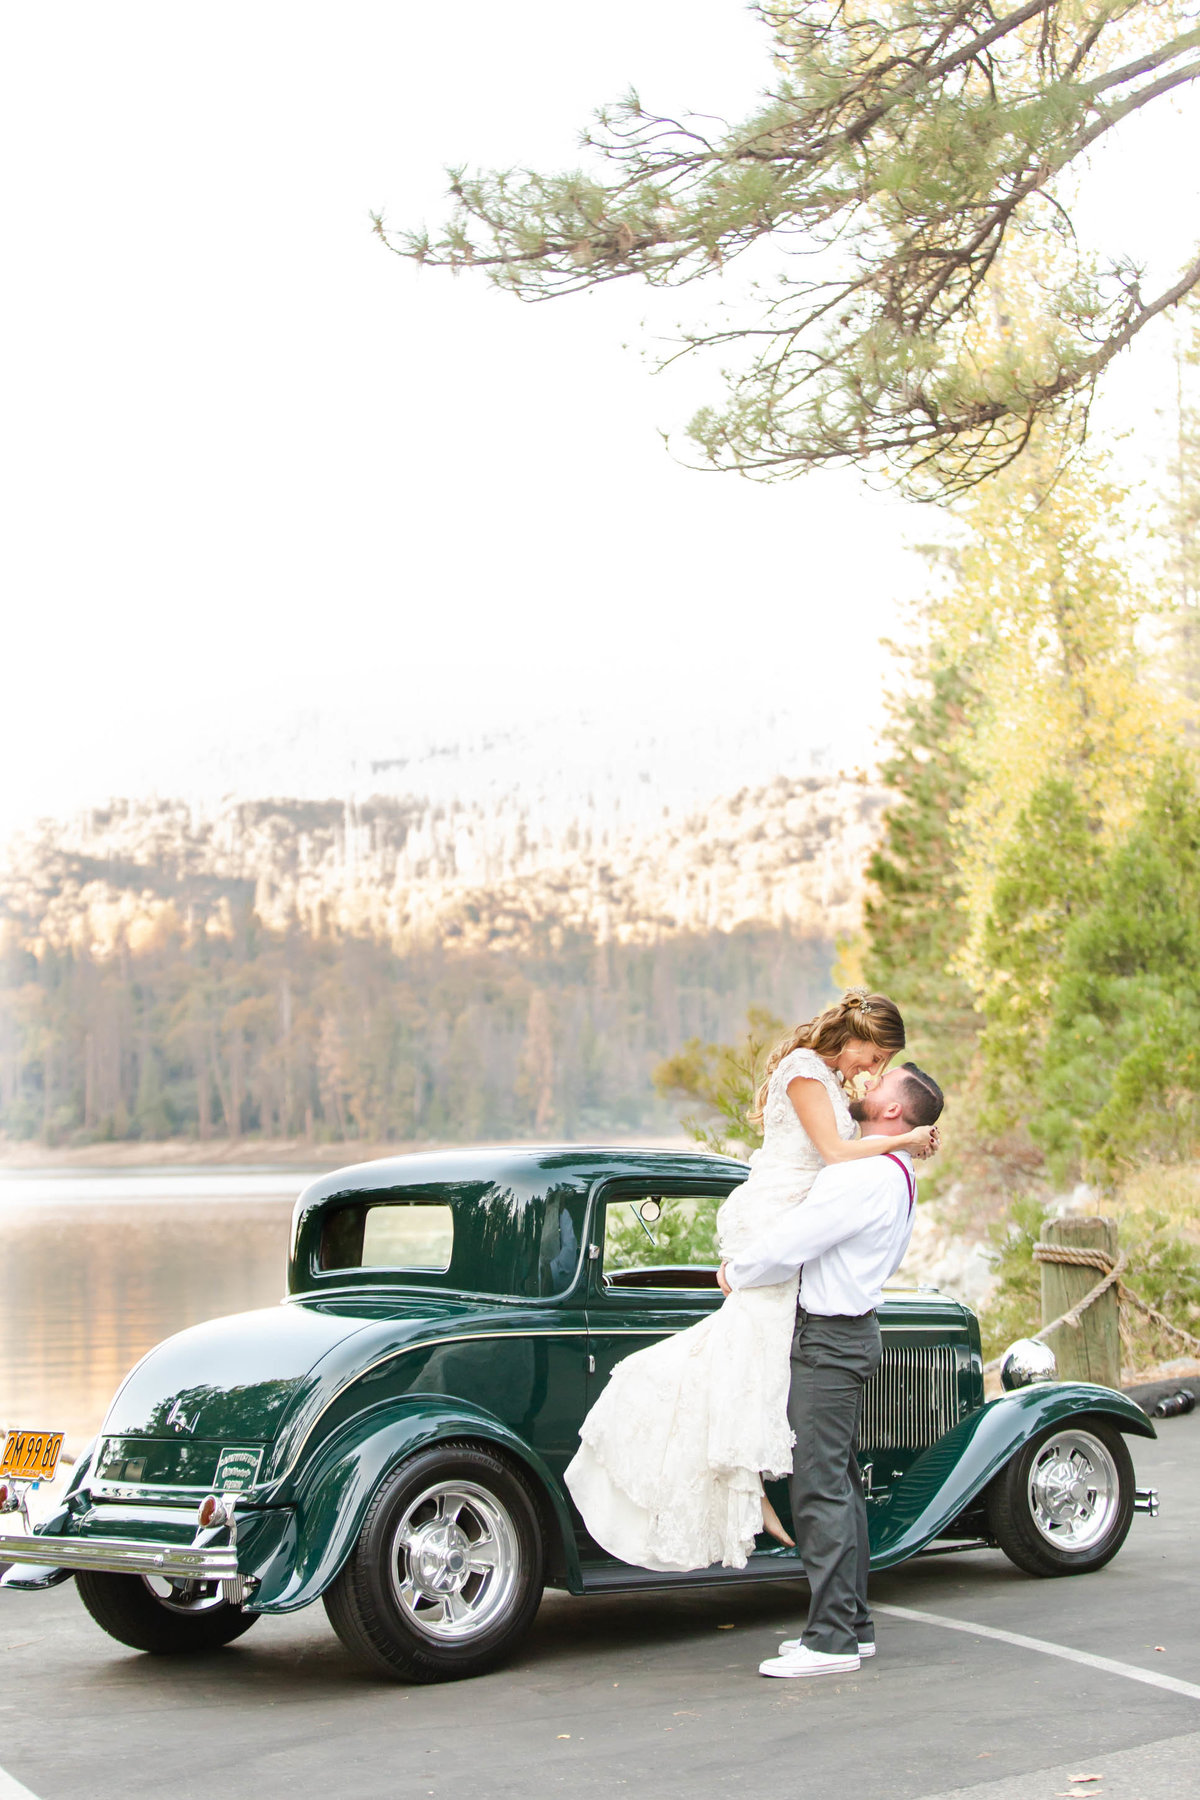 Bass Lake wedding couple kissing in front of vintage car